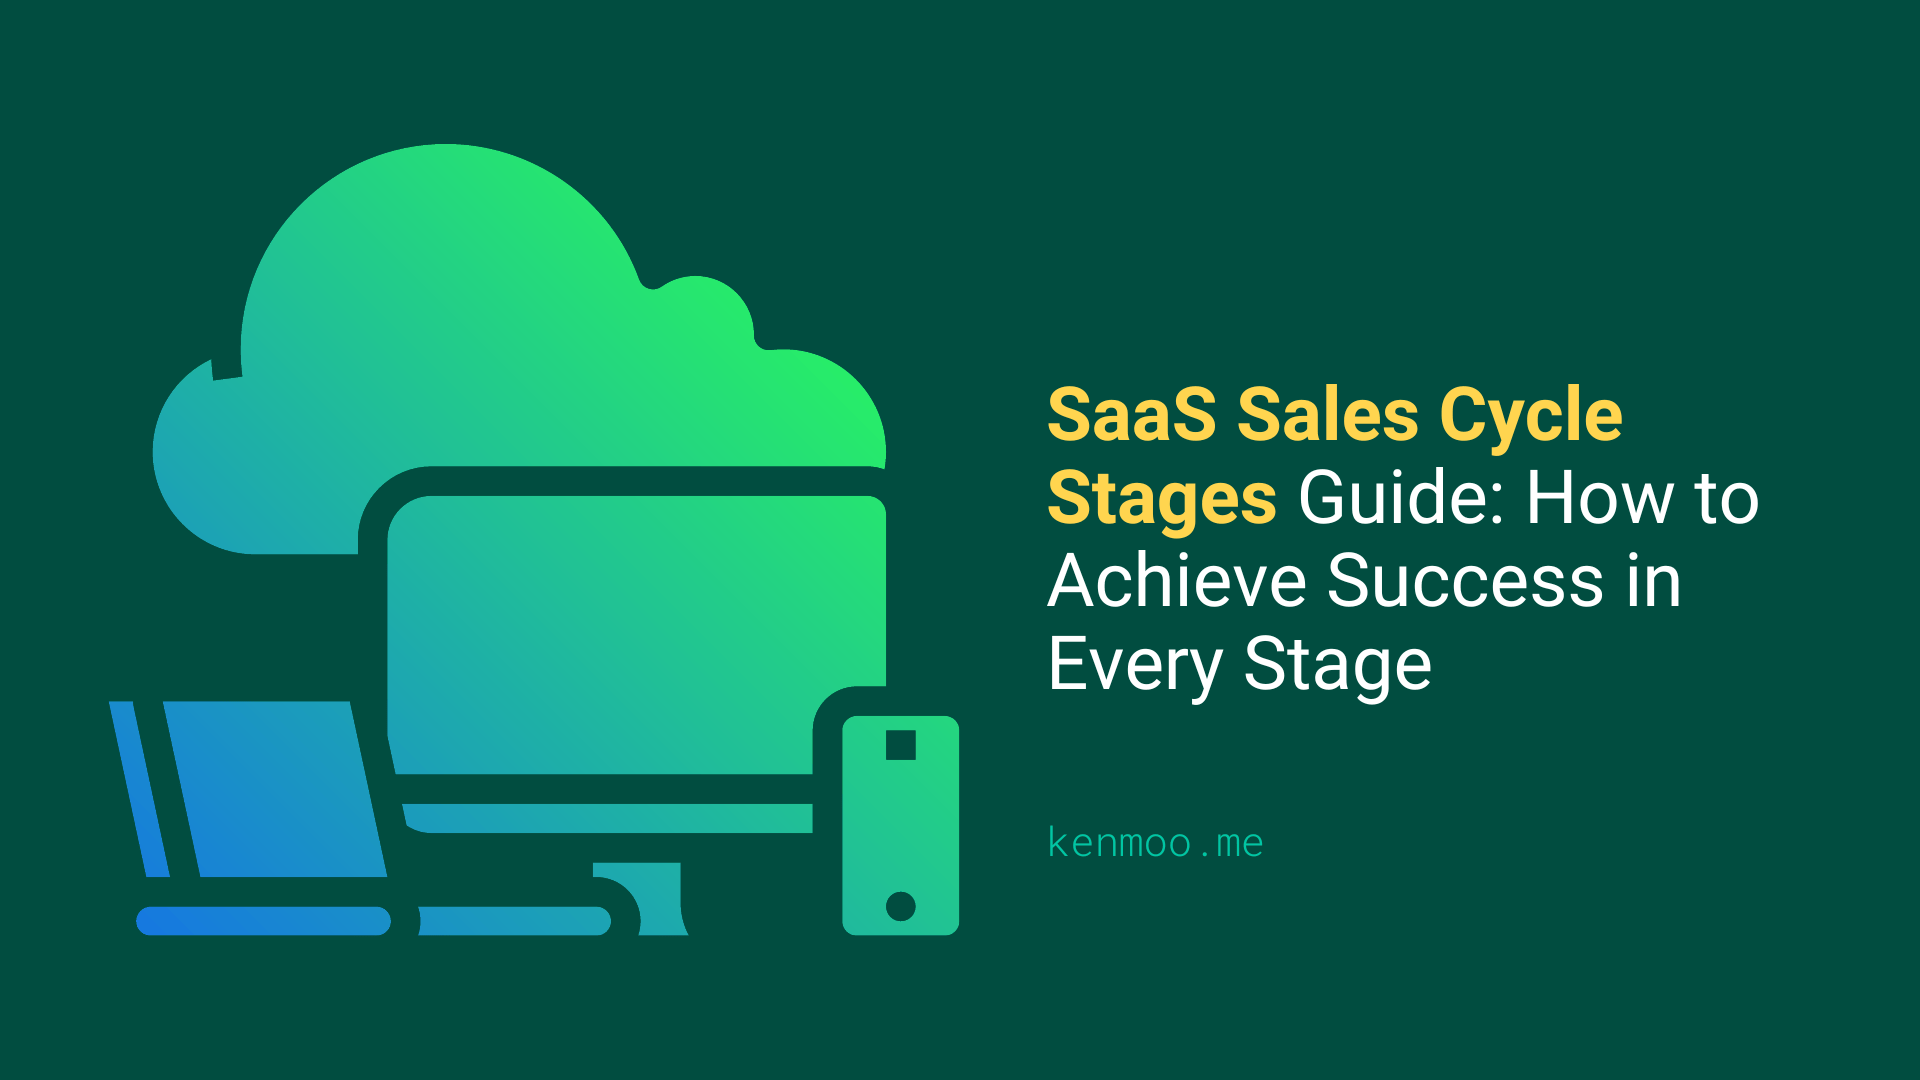 SaaS Sales Cycle Stages Guide: How to Achieve Success in Every Stage